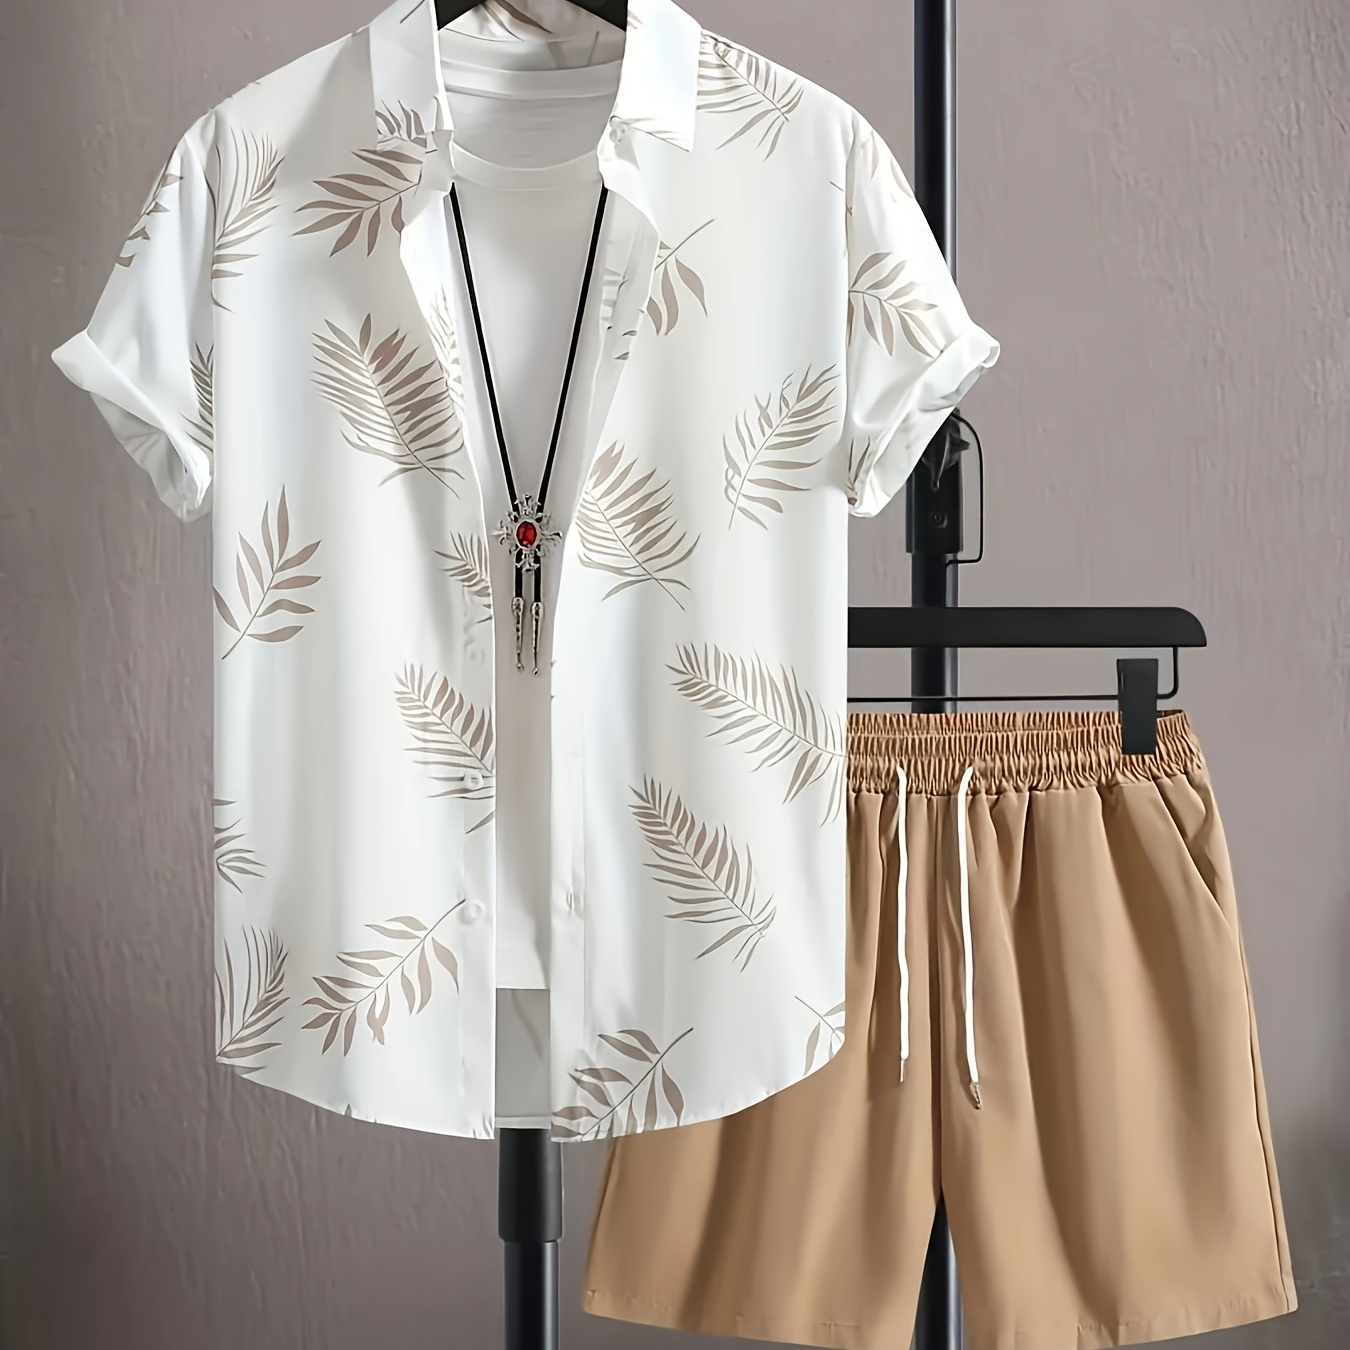 

Men's Two-piece Outfits, Leaf Print Button Up Shirt And Drawstring Plain Shorts, Casual Loose Clothing For Summer